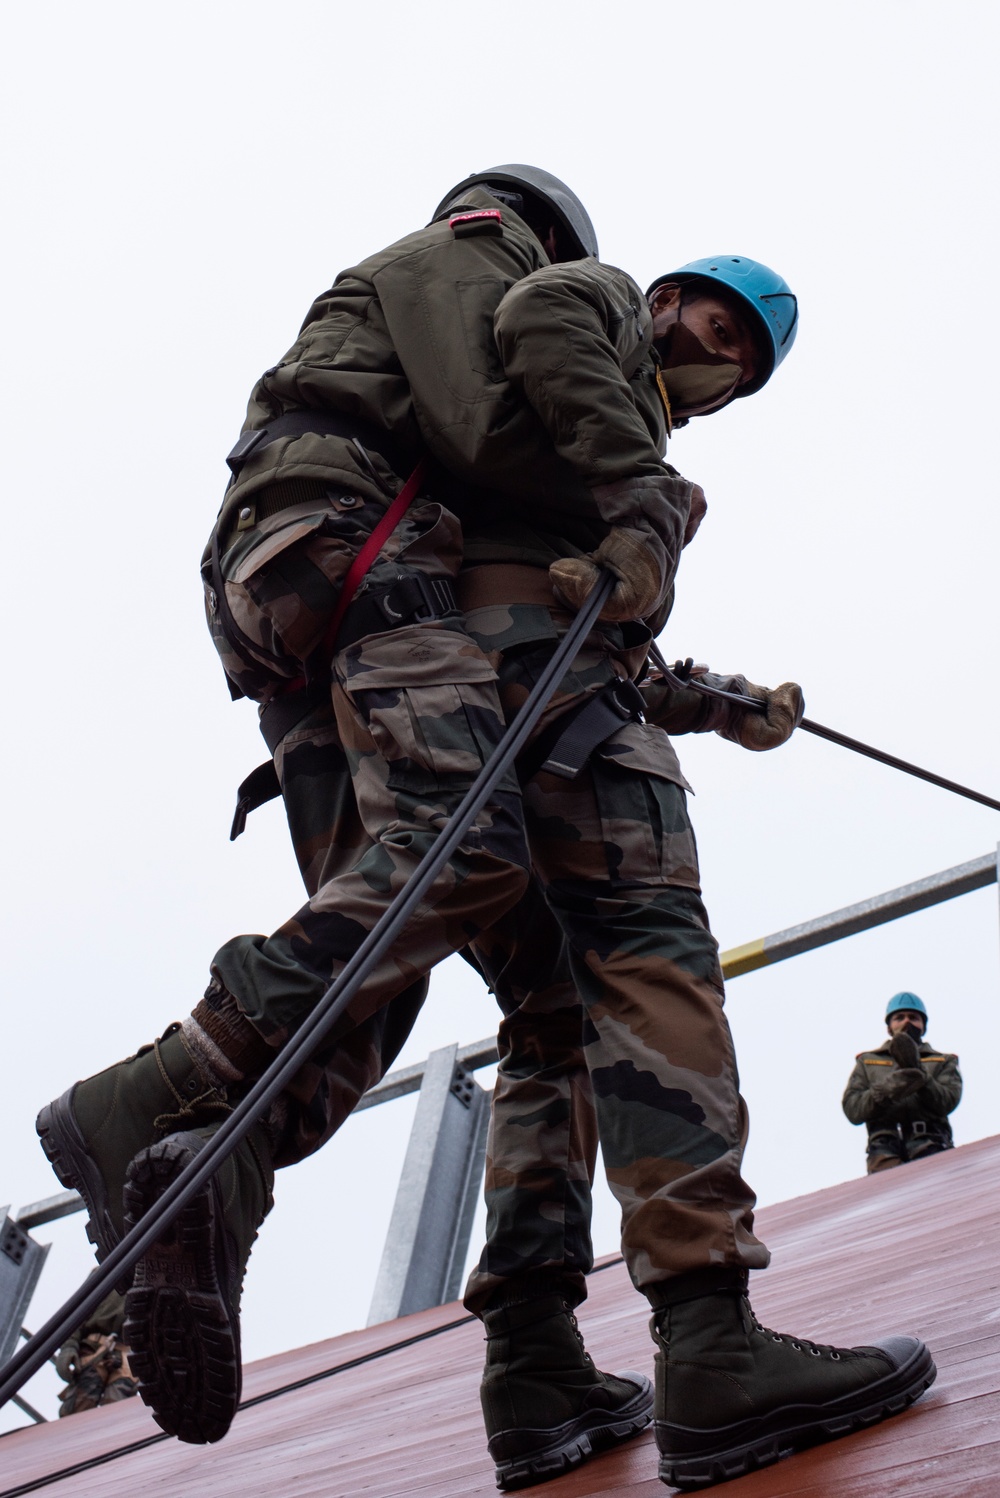 Indian and U.S. Army troops share rappel techniques during Yudh Abhyas 21